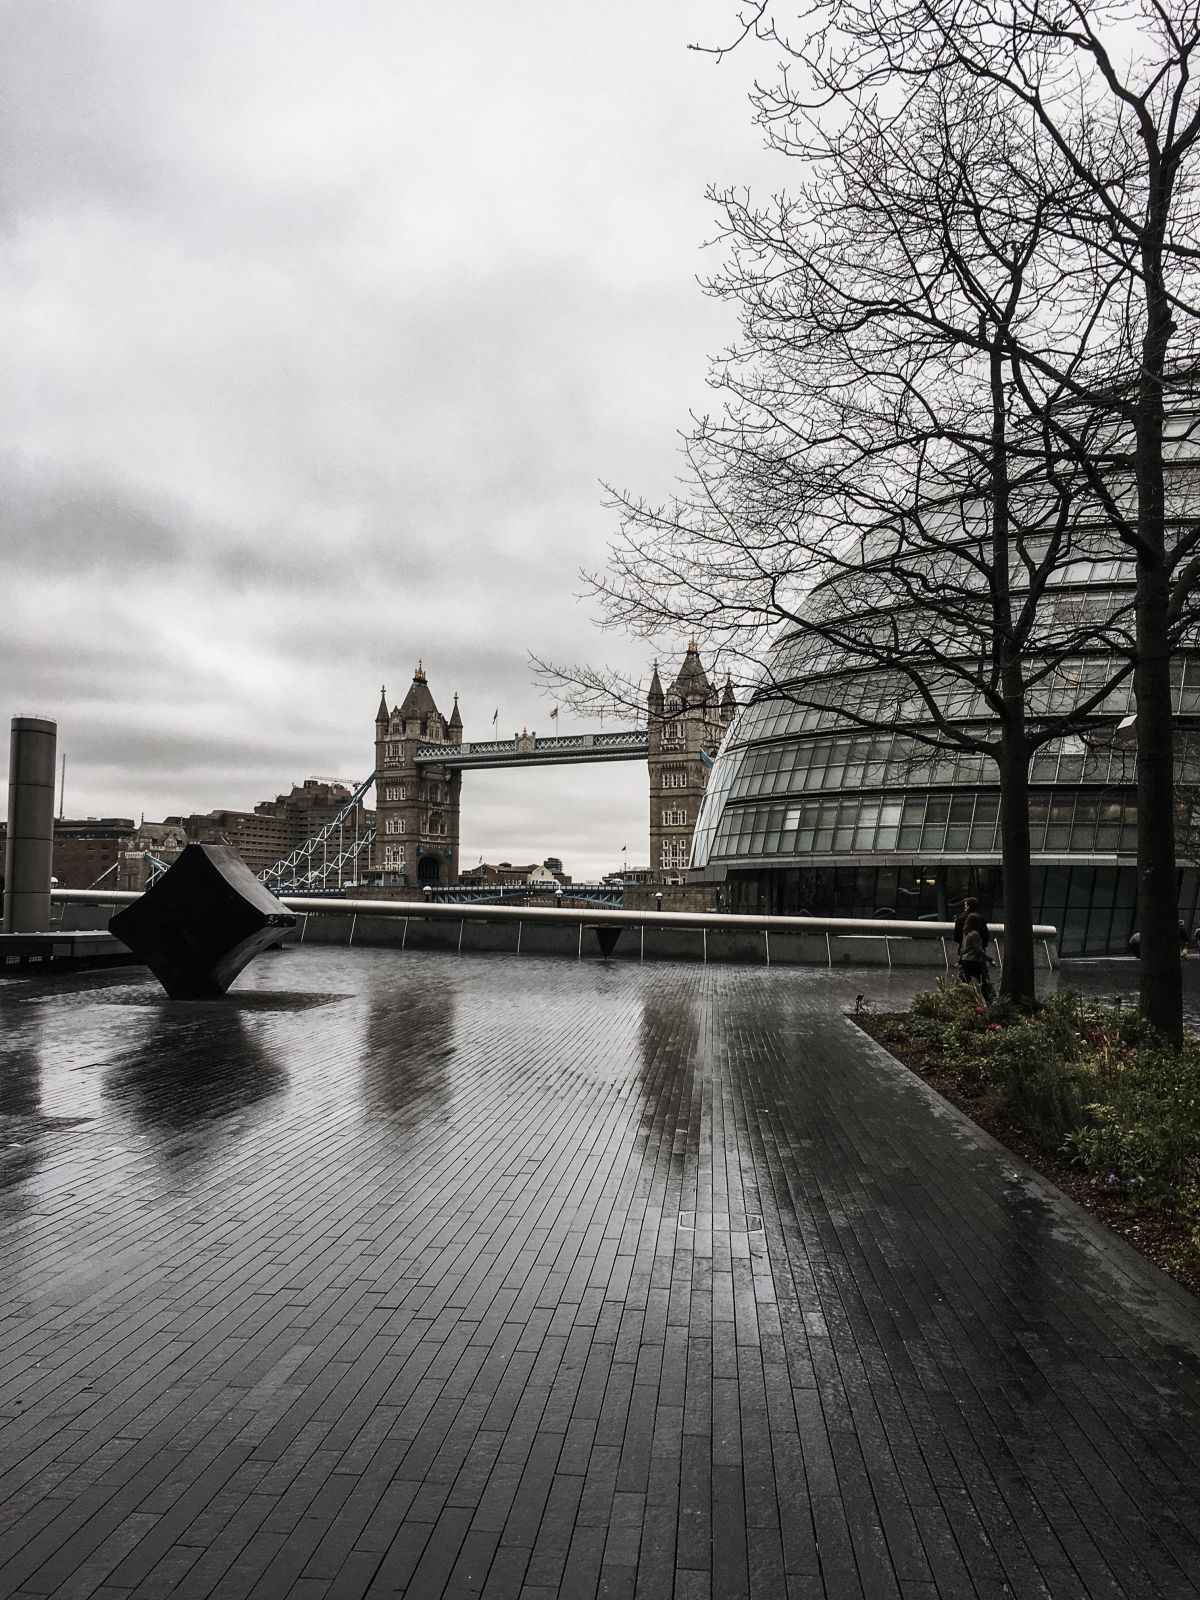 Here’s how you can enjoy a rainy day in London!